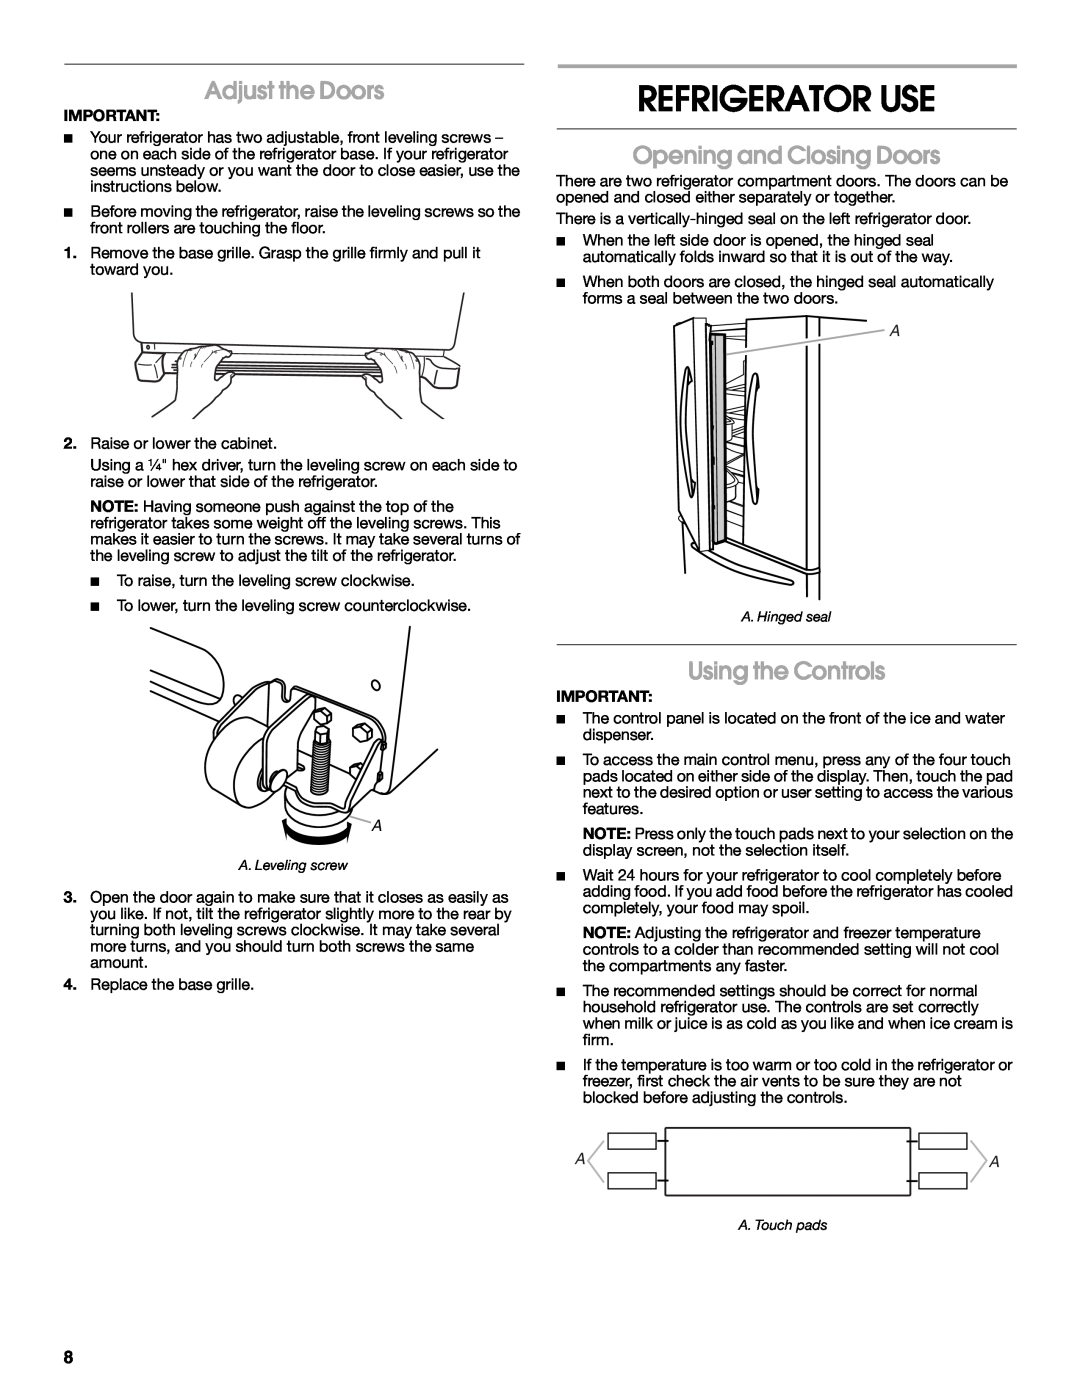 Jenn-Air W10329370A Refrigerator Use, Adjust the Doors, Opening and Closing Doors, Using the Controls 